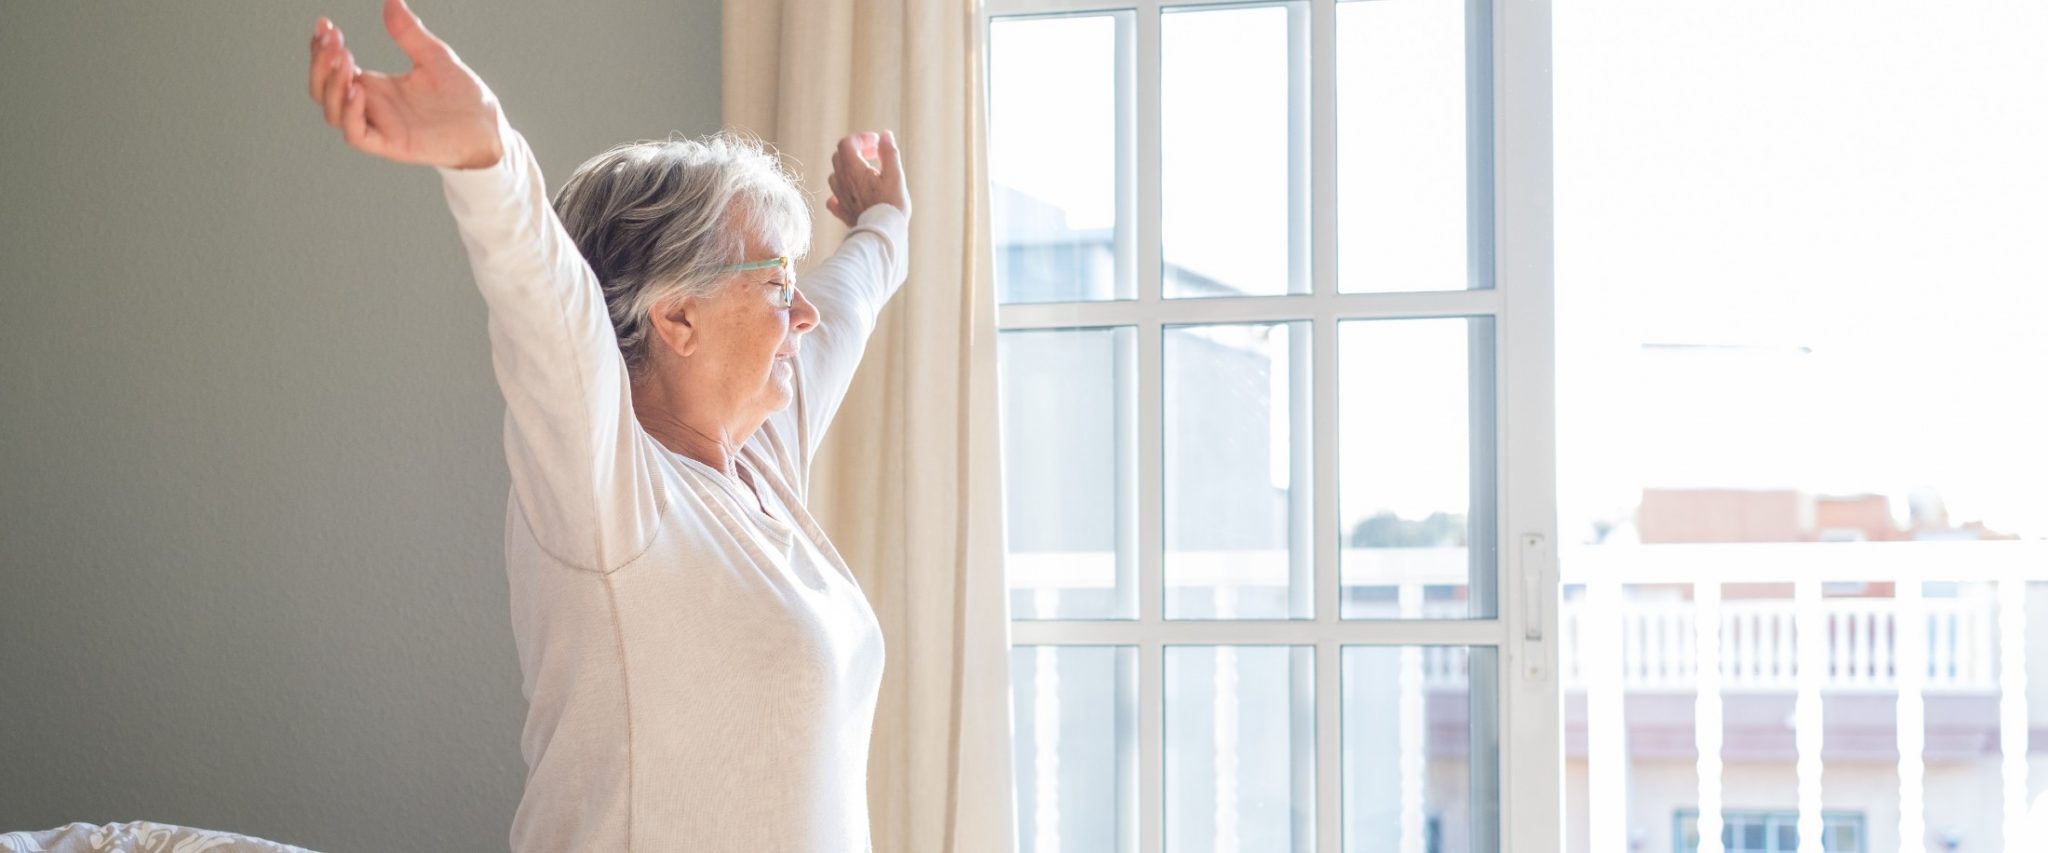 Senior woman stretching in front of window